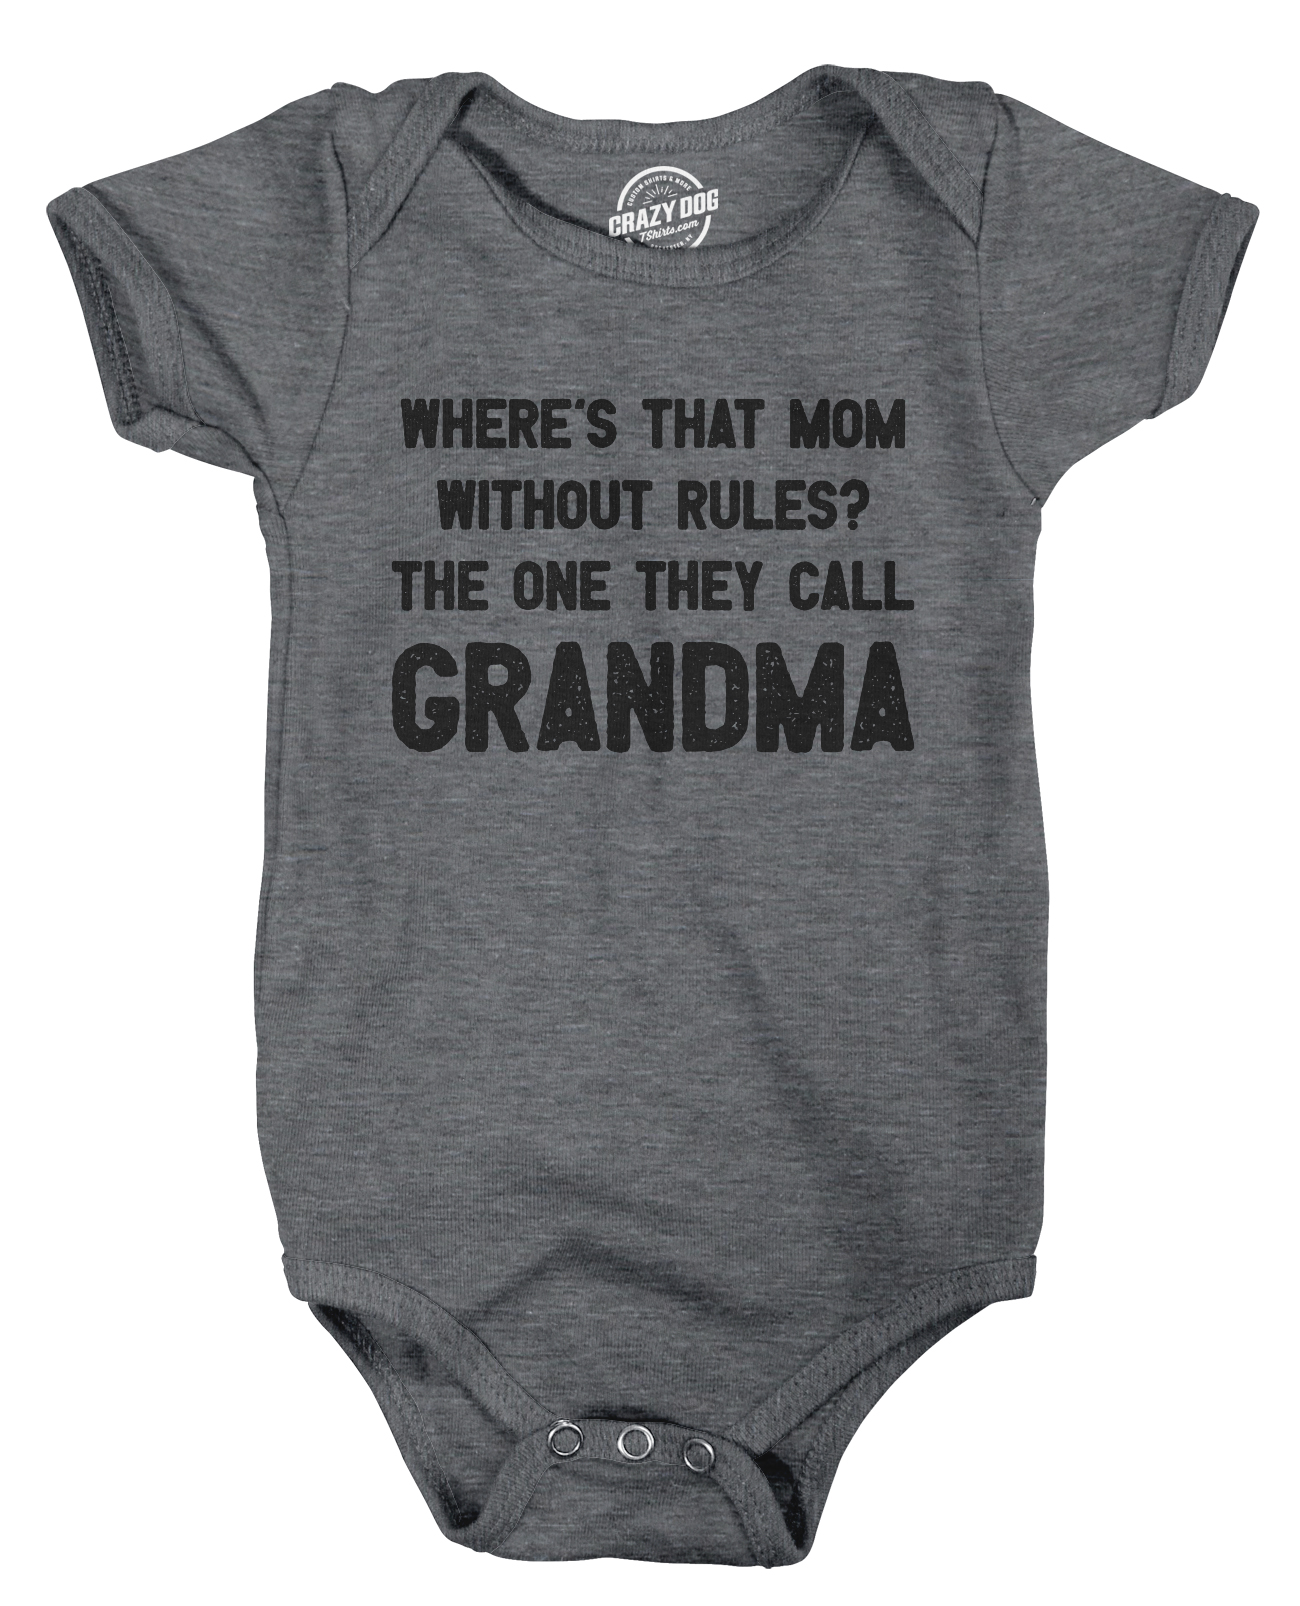 Crazy Dog Tshirts Where's That Mom Without Rules? The One They Call Grandma Baby Bodysuit Funny Infant Jumper